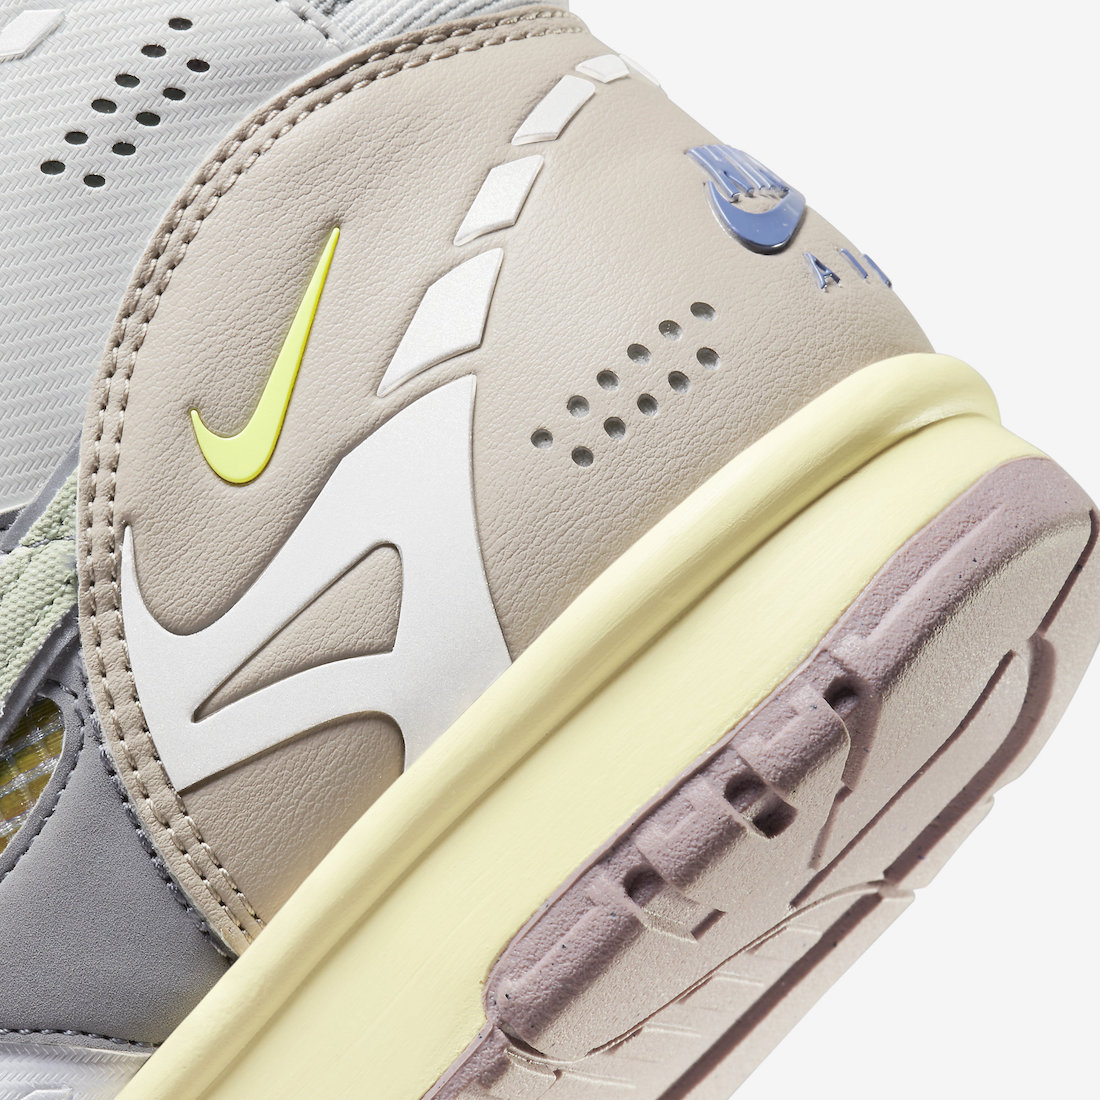 Nike Air Trainer 1 Utility Light Smoke Grey Honeydew Particle Grey DH7338-002 Release Date Price